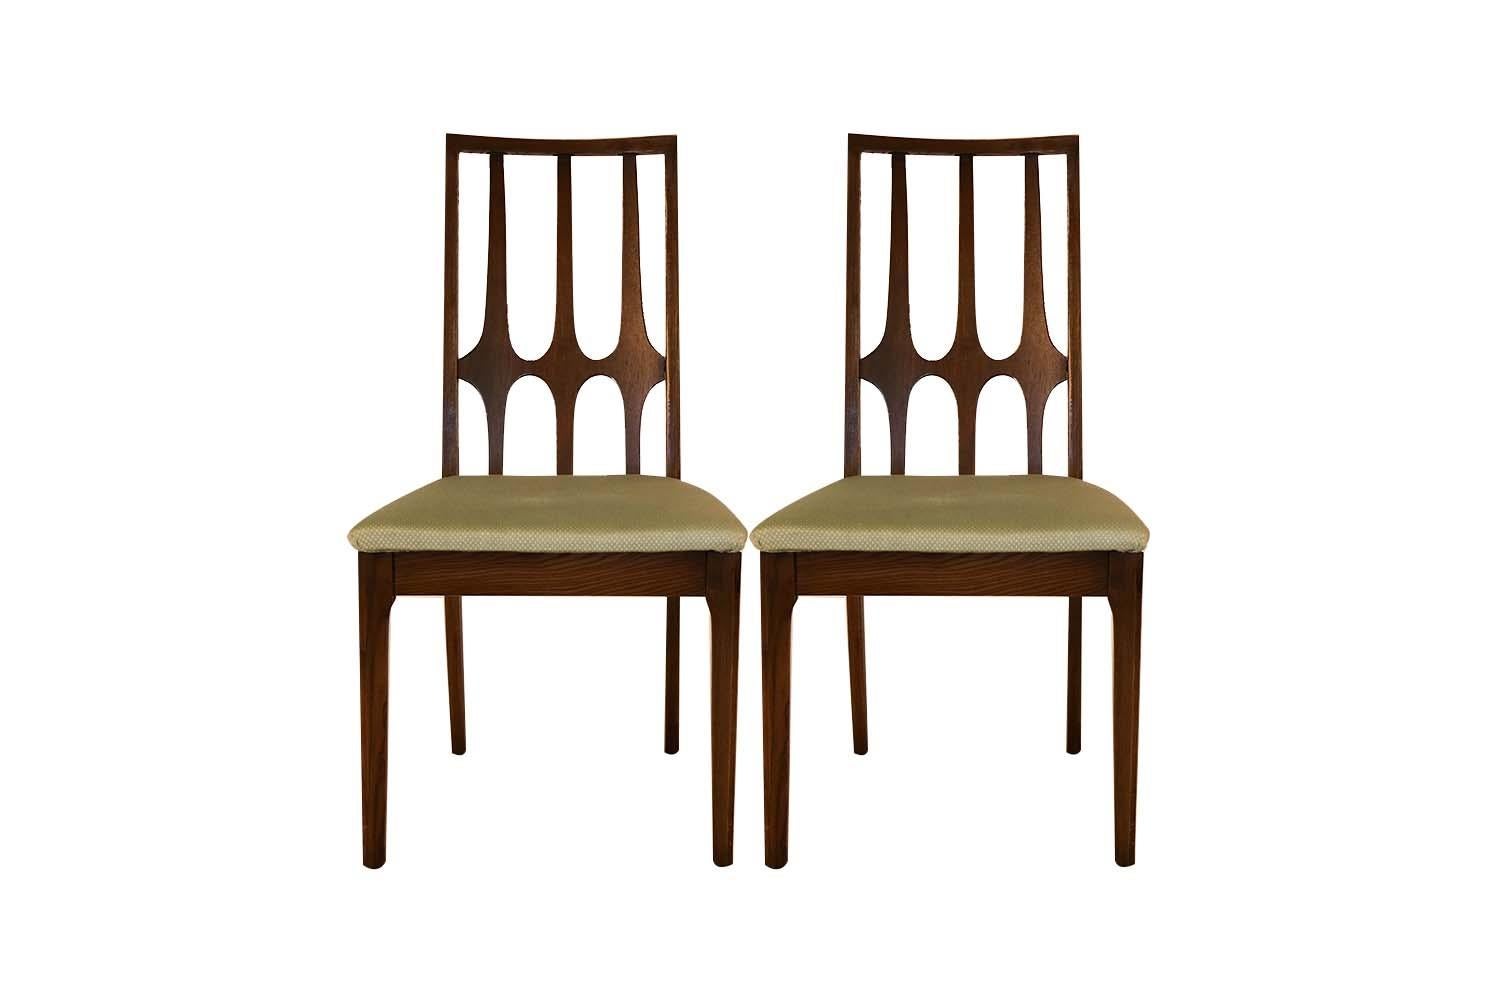 Set of eight stunning Mid-Century Modern walnut Broyhill Brasilia dining chairs designed by the legendary Oscar Niemeyer, and manufactured by Broyhill for the Brasilia collection, circa early 1960s. The Brasilia line is a collection that was first